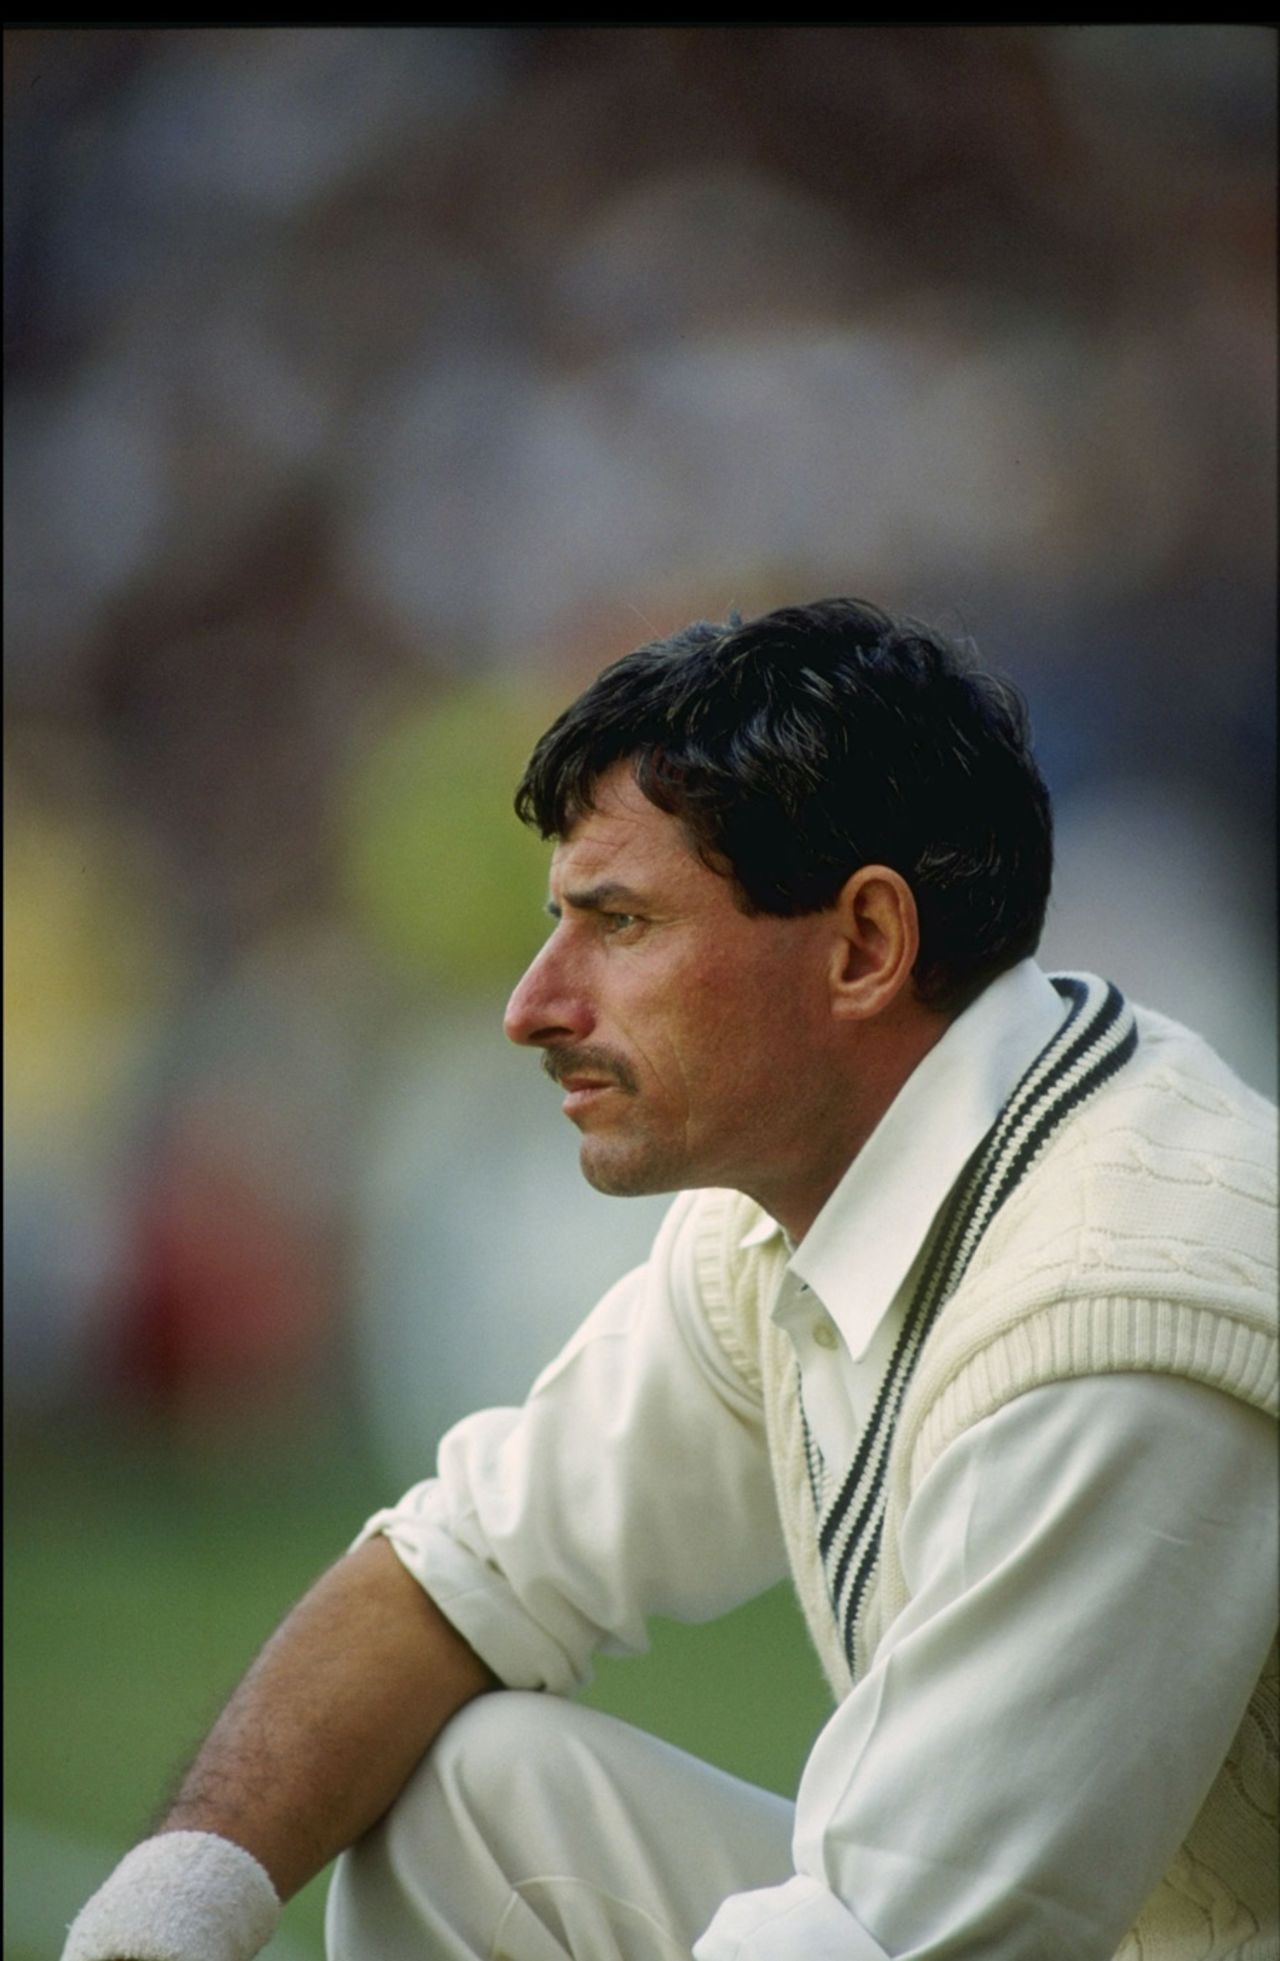 Richard Hadlee in thoughtful mood before the 2nd ODI, England v New Zealand, The Oval, May 25, 1990